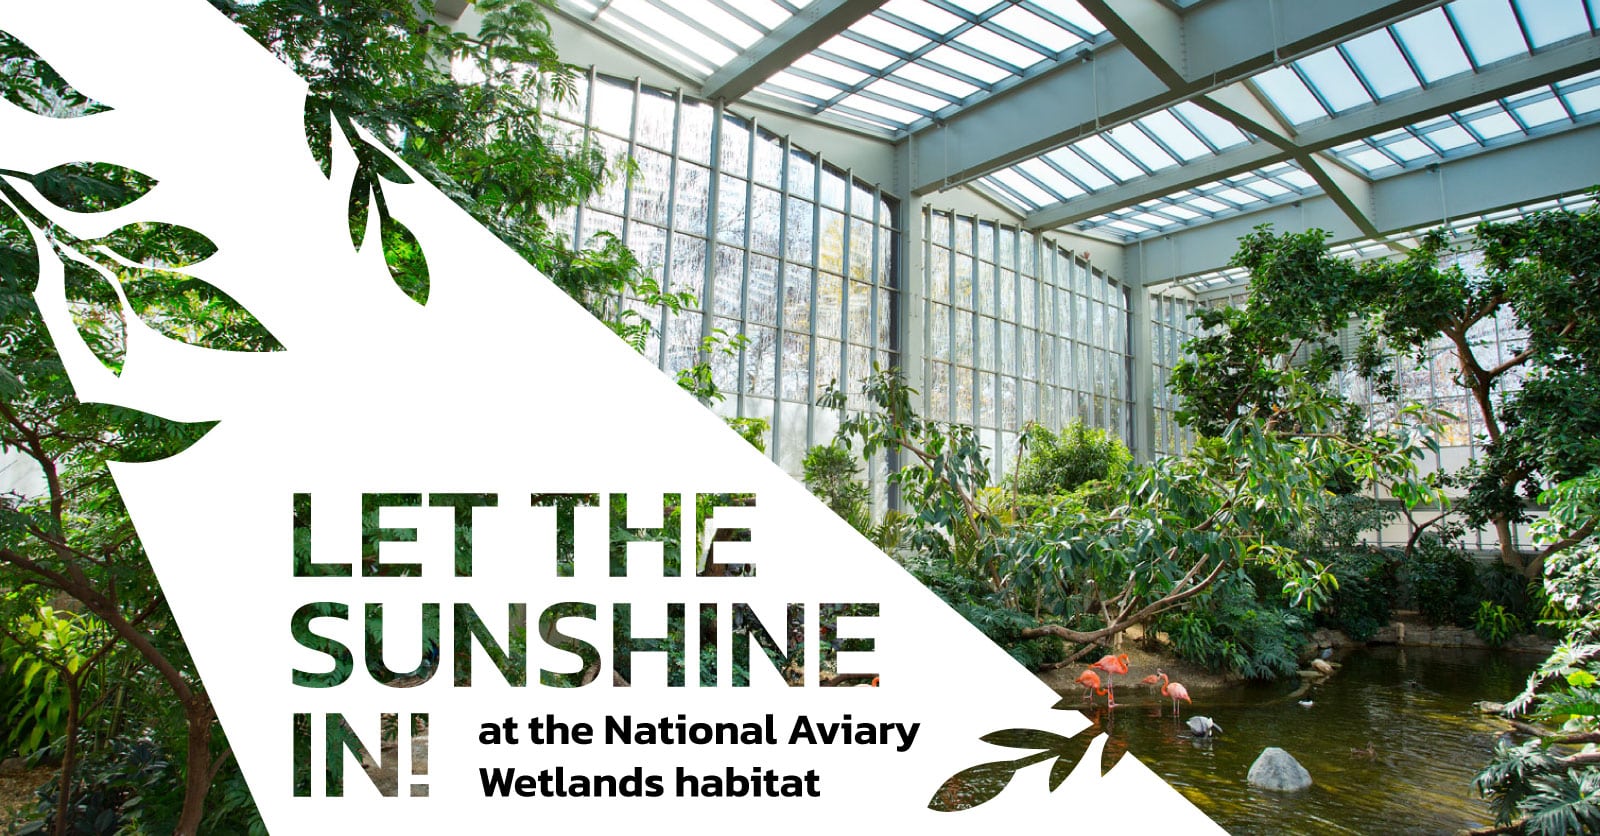 Let the sunshine in! How Acid-Etched Glass Improves Daylighting and Saves Birds’ Lives at the National Aviary Wetlands Habitat